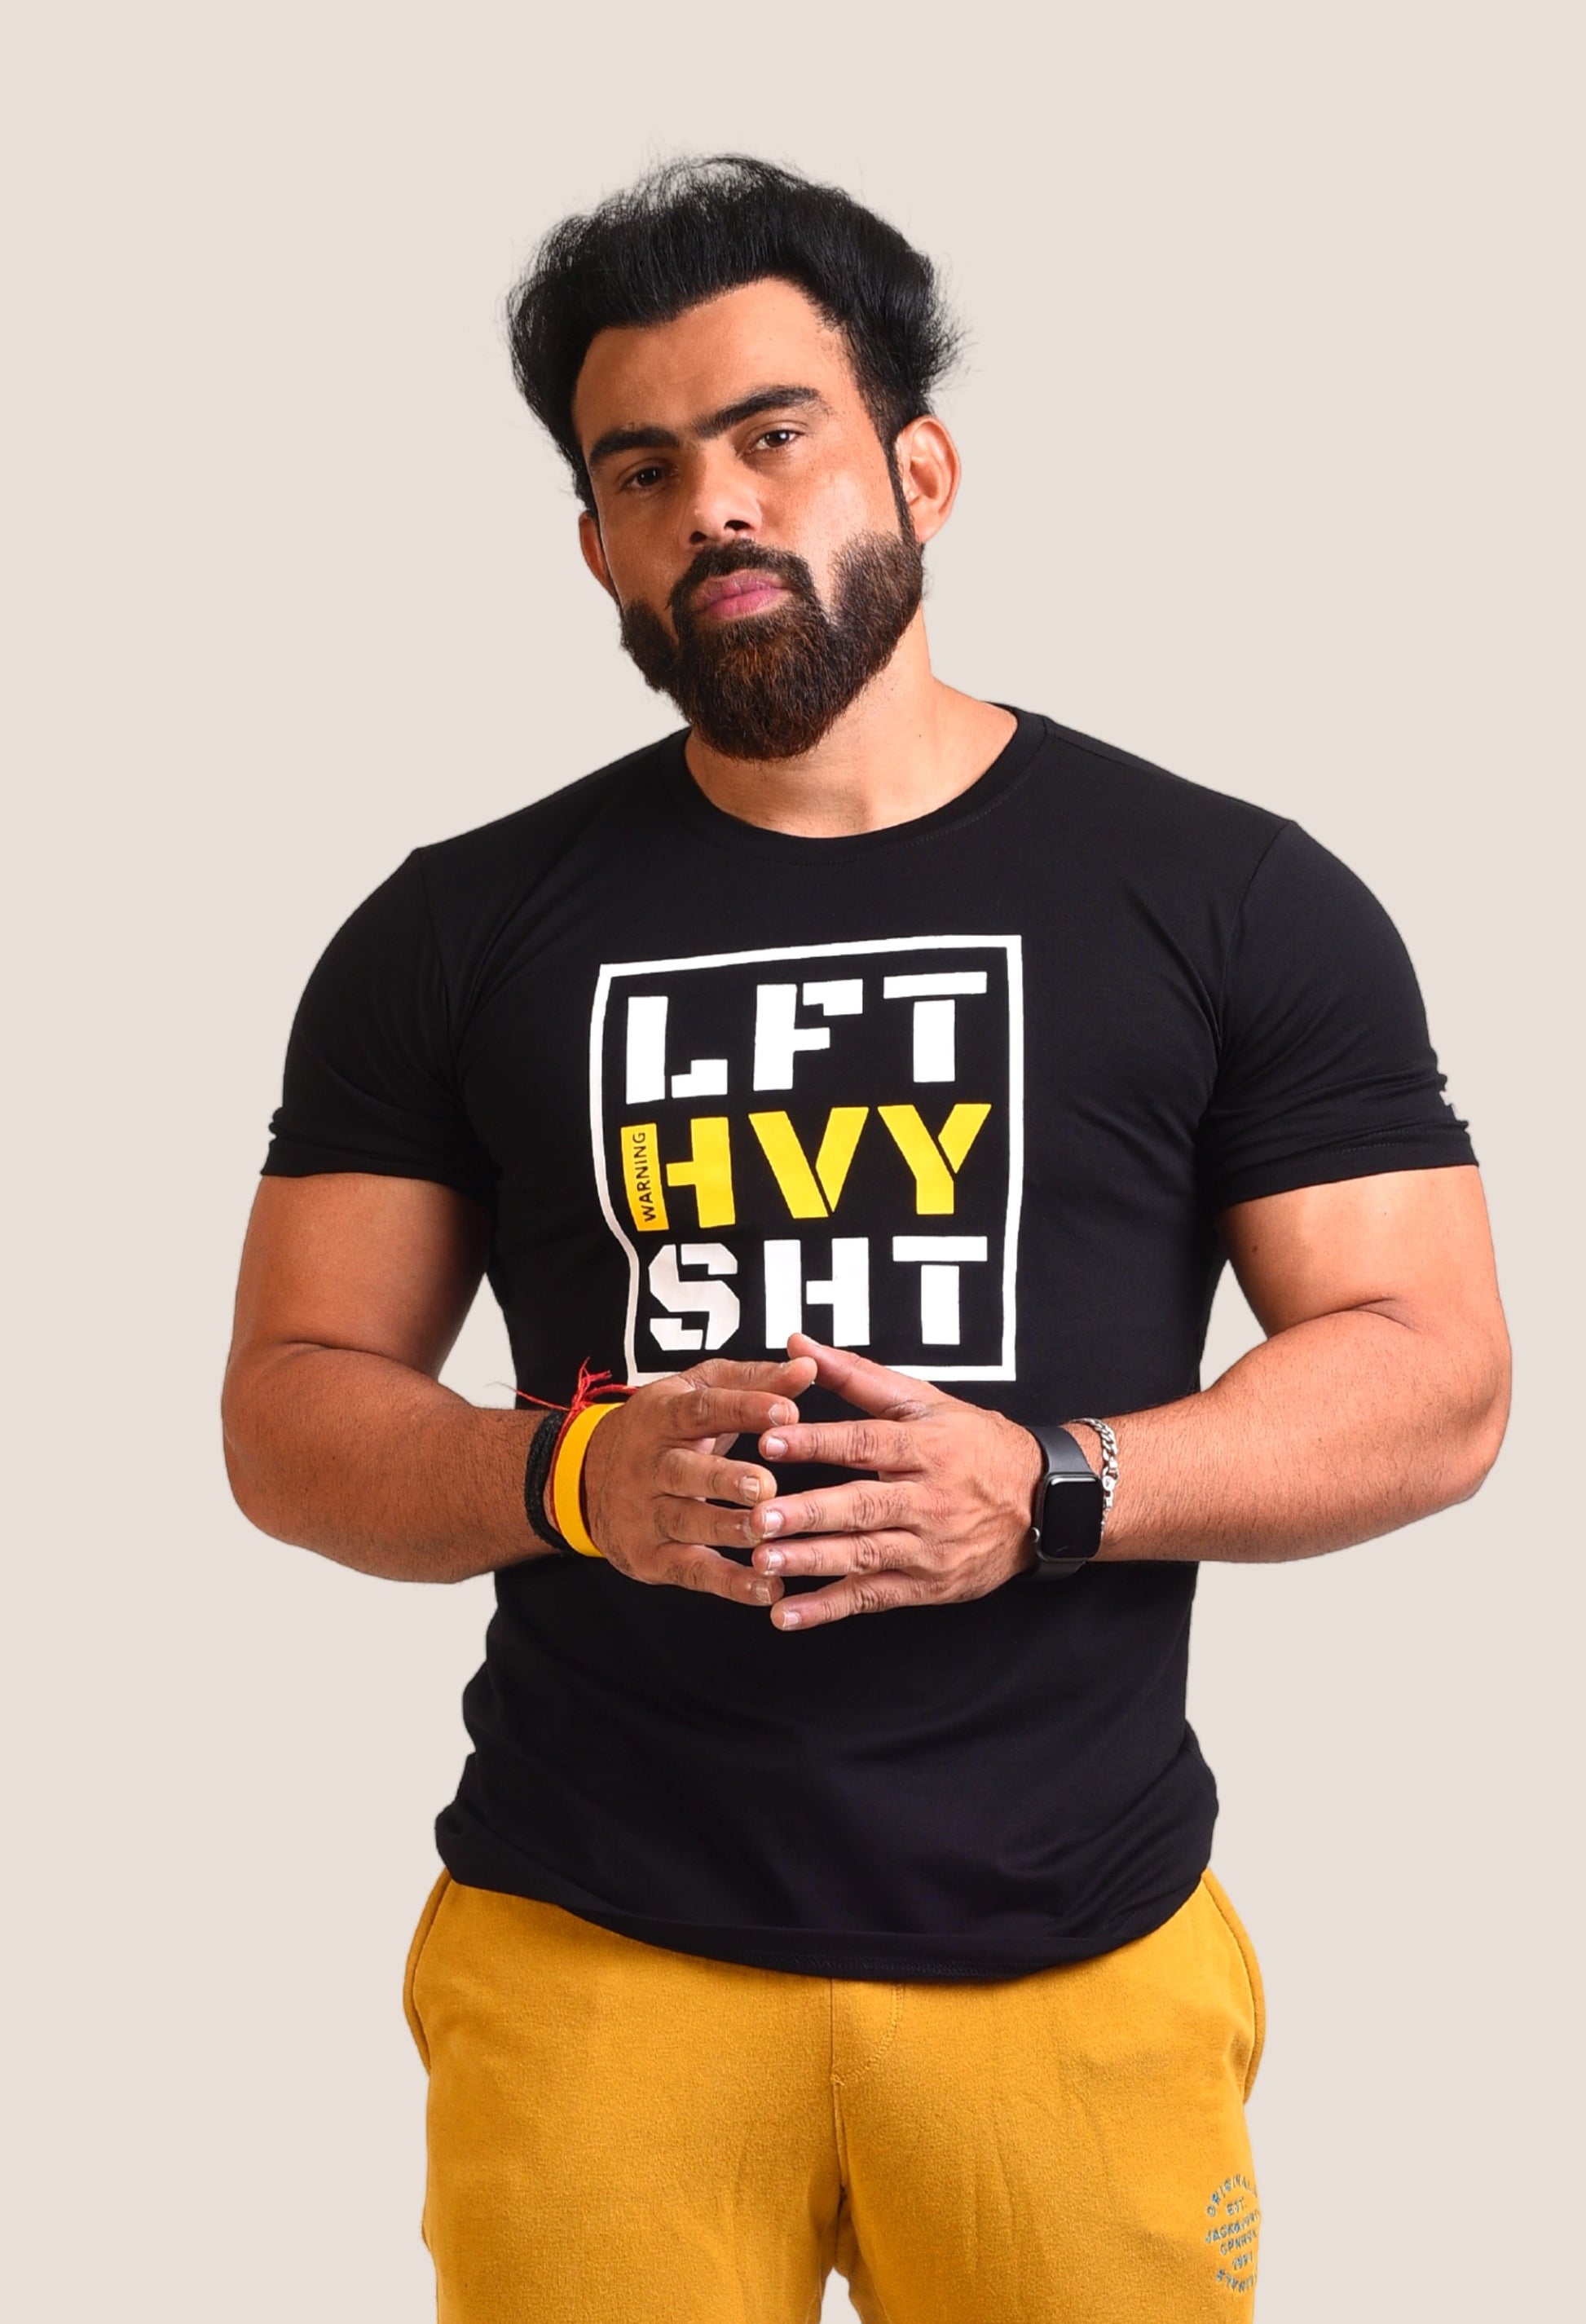 Gym T Shirt - Lift Heavy Shit - Men T-Shirt with premium cotton Lycra. The Sports T Shirt by Strong Soul